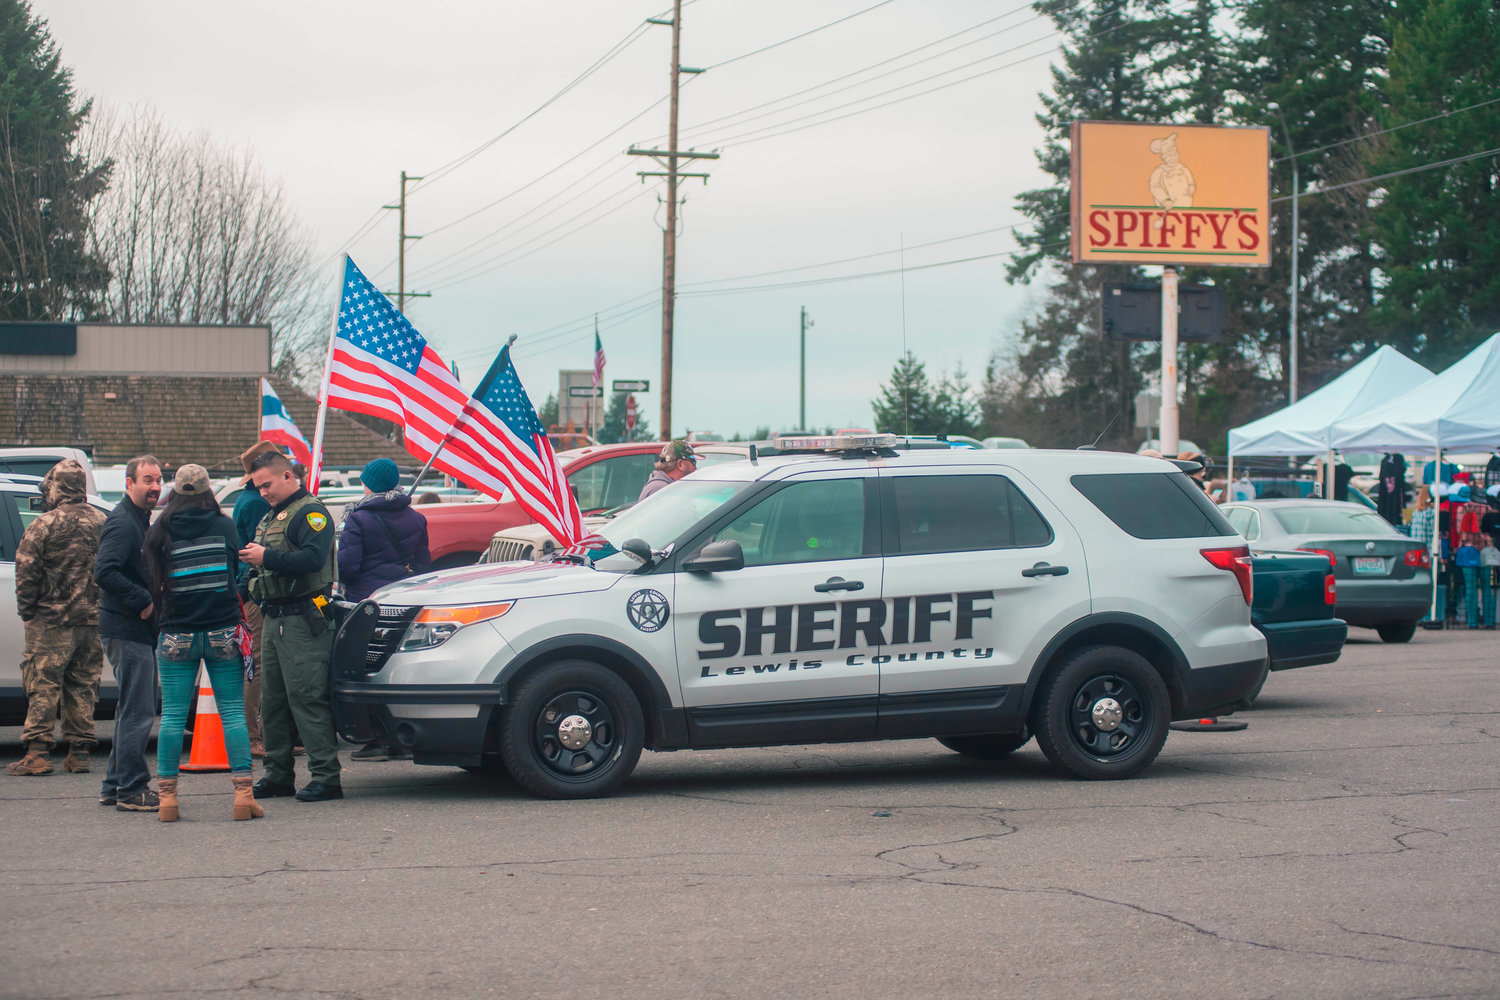 Lewis County Sheriff Deputies respond to a call at Spiffy’s after a car peeled out of the parking lot while surrounded by a group of ‘peaceful protesters’ on Thursday in South Chehalis.